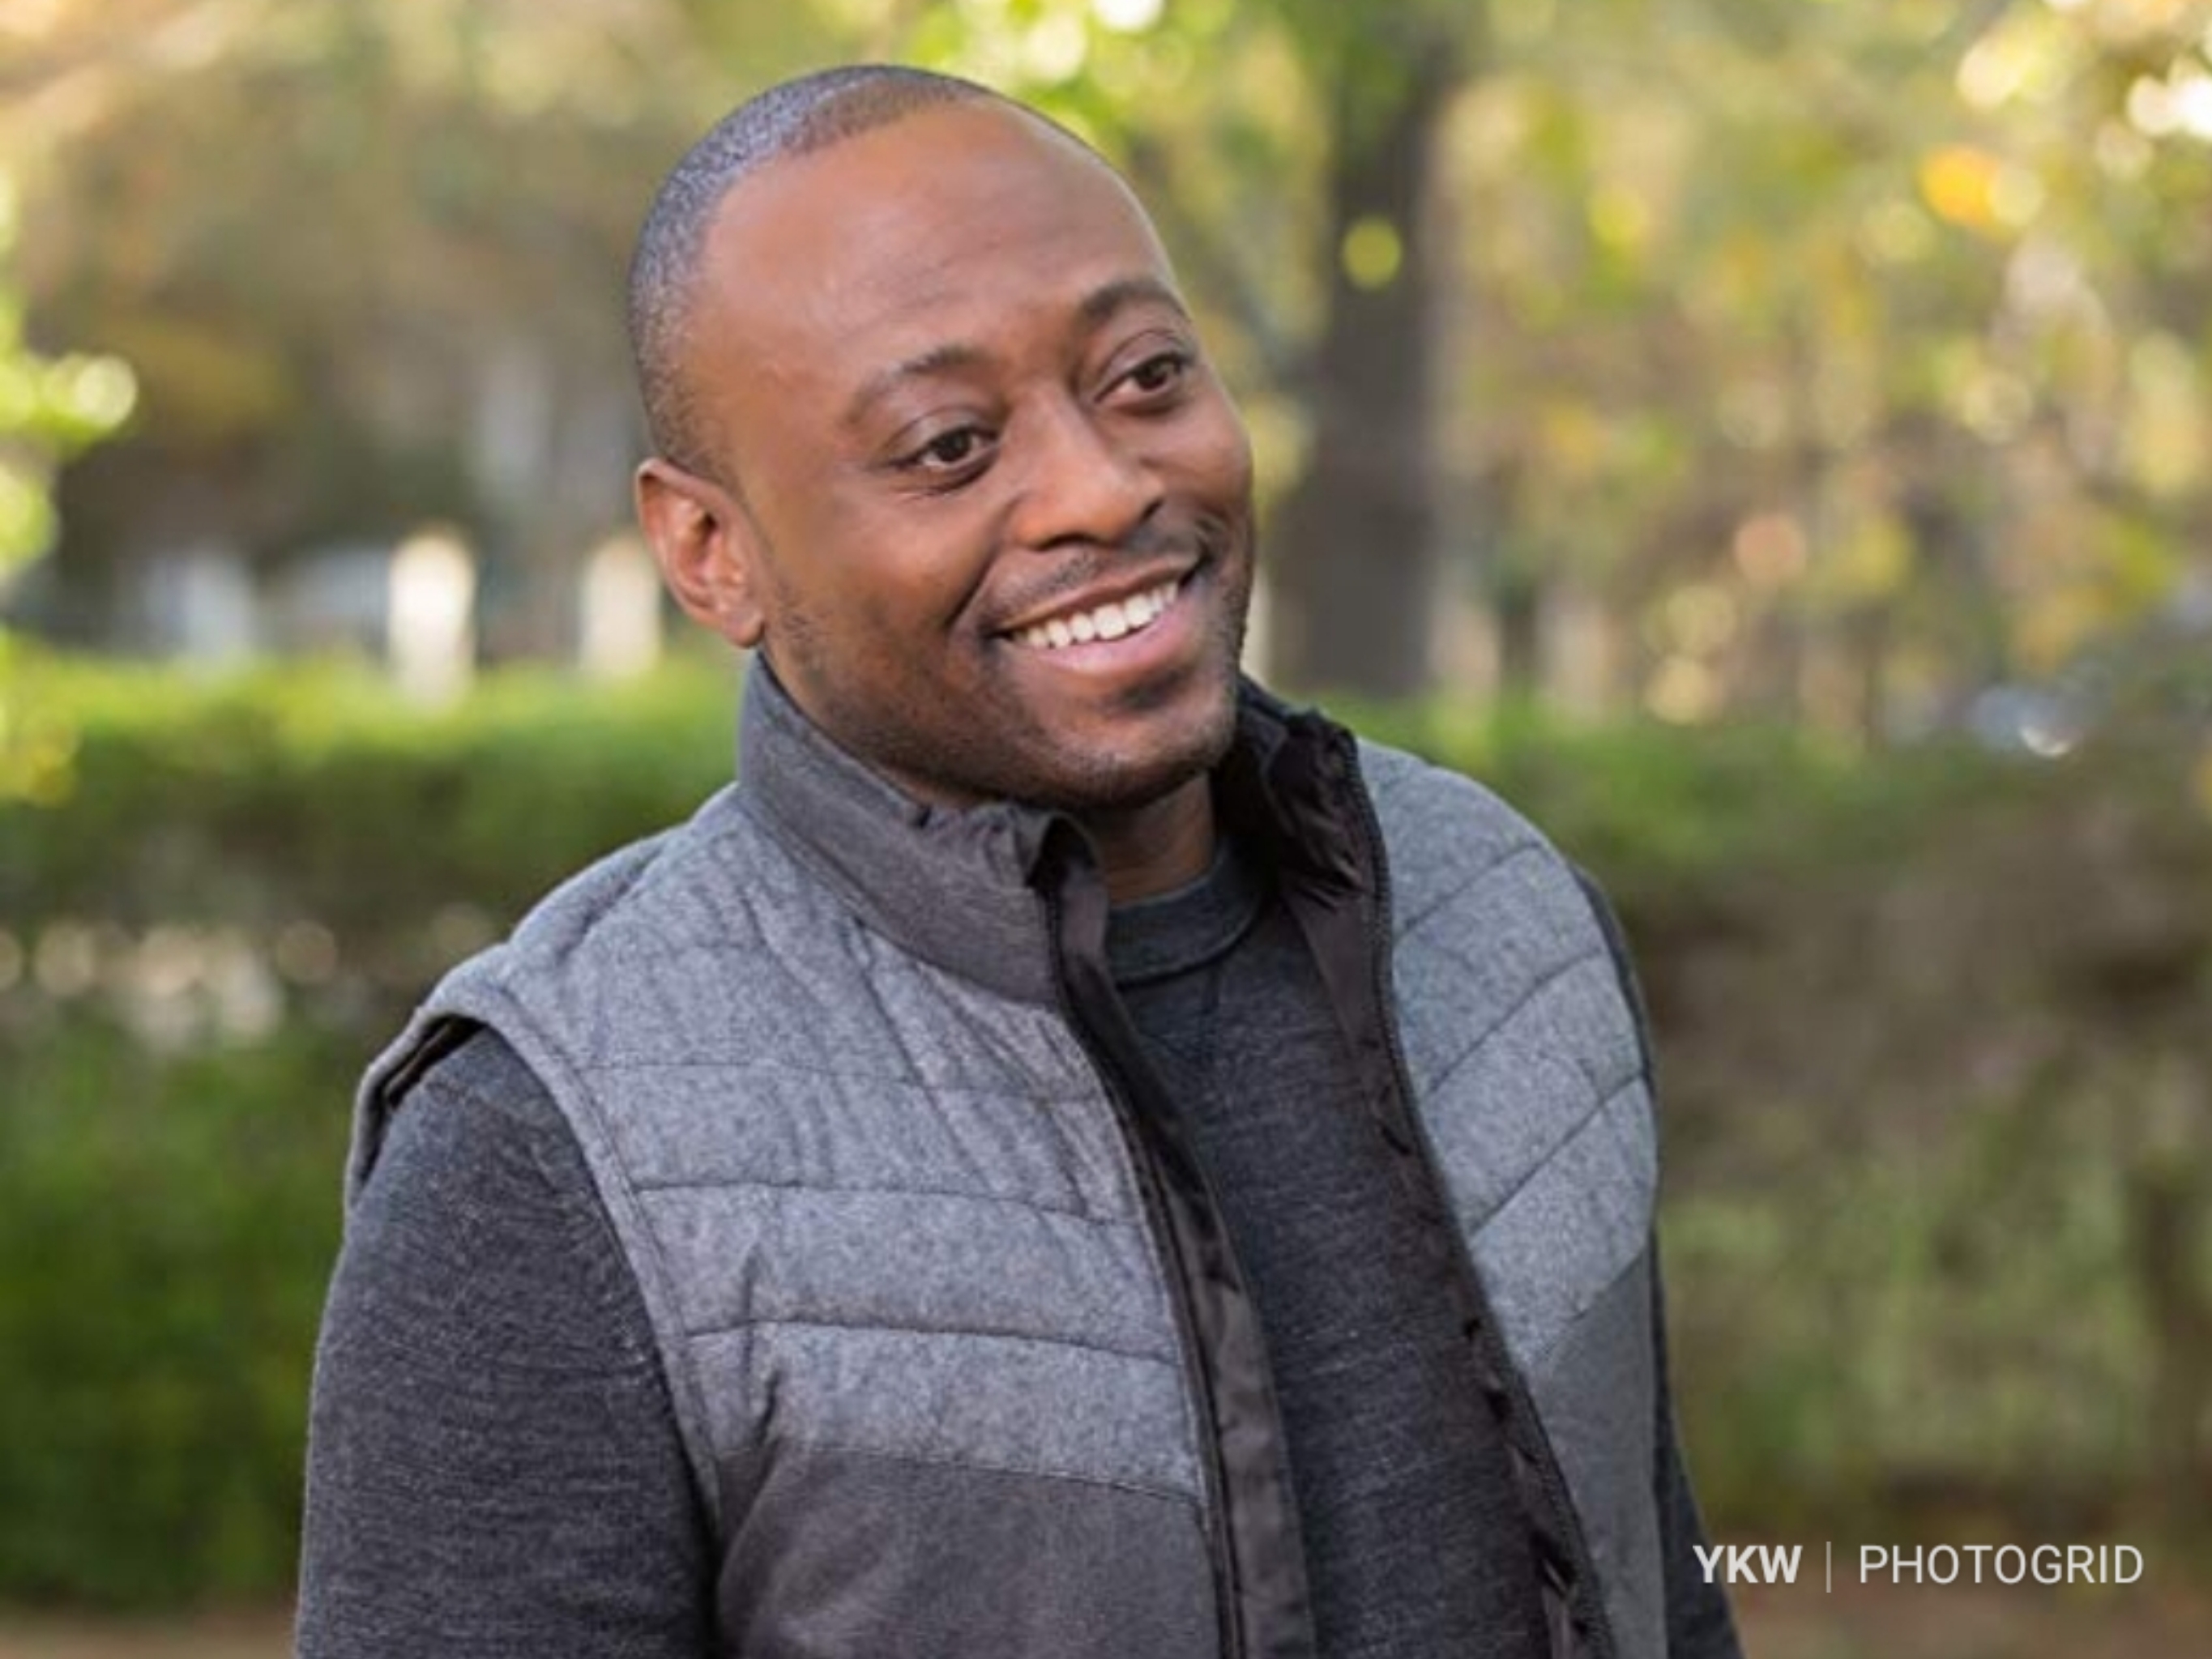 Omar Epps Shares Classic Video Of Him As Queen Latifah’s Backup Dancer And Singer